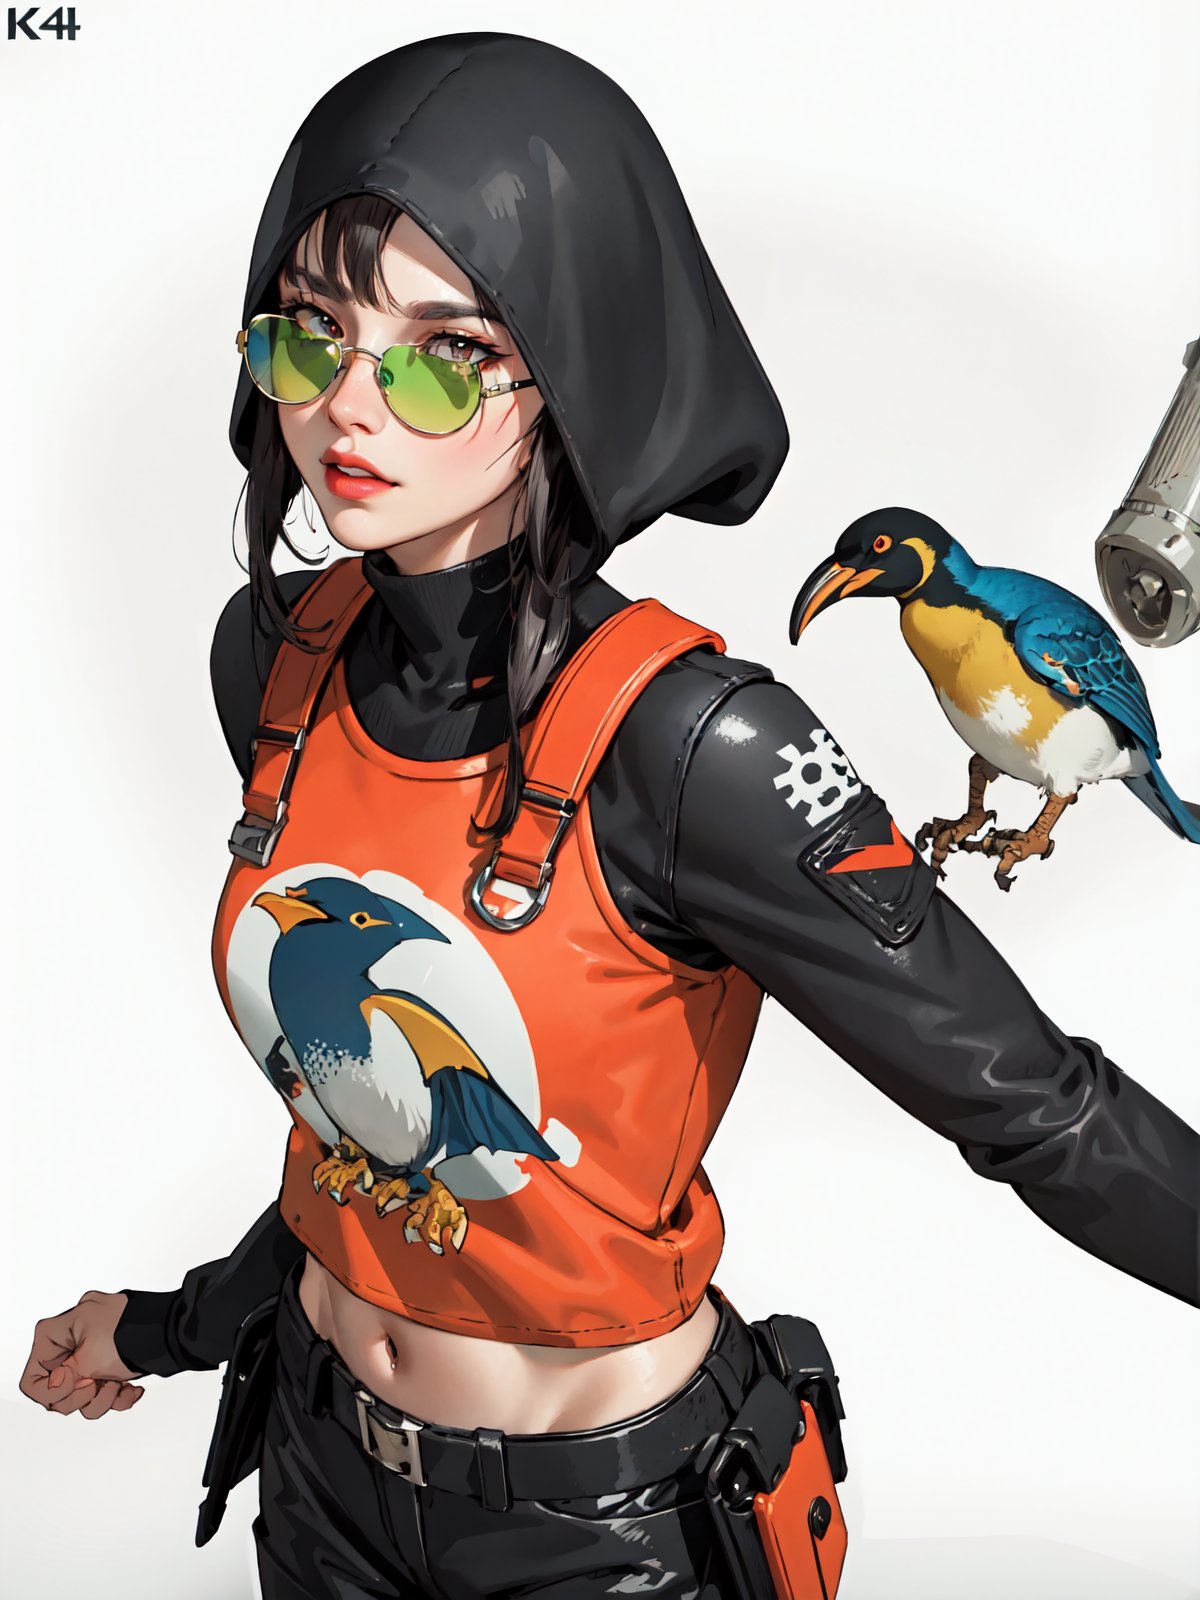 (masterpiece:1.2, best quality), illustration, penguin character wearing trendy colorful sunglasses, orange juice splash, sliding, t-shirt design, 3D vector art, cute, fantasy art, bright color, latexskin, close-up, white background, low-poly, soft lighting, bird's-eye view, isometric style, retro aesthetic, focused on the character, 4K resolution, photorealistic rendering, using Cinema 4D,dragonborn,ohara koson